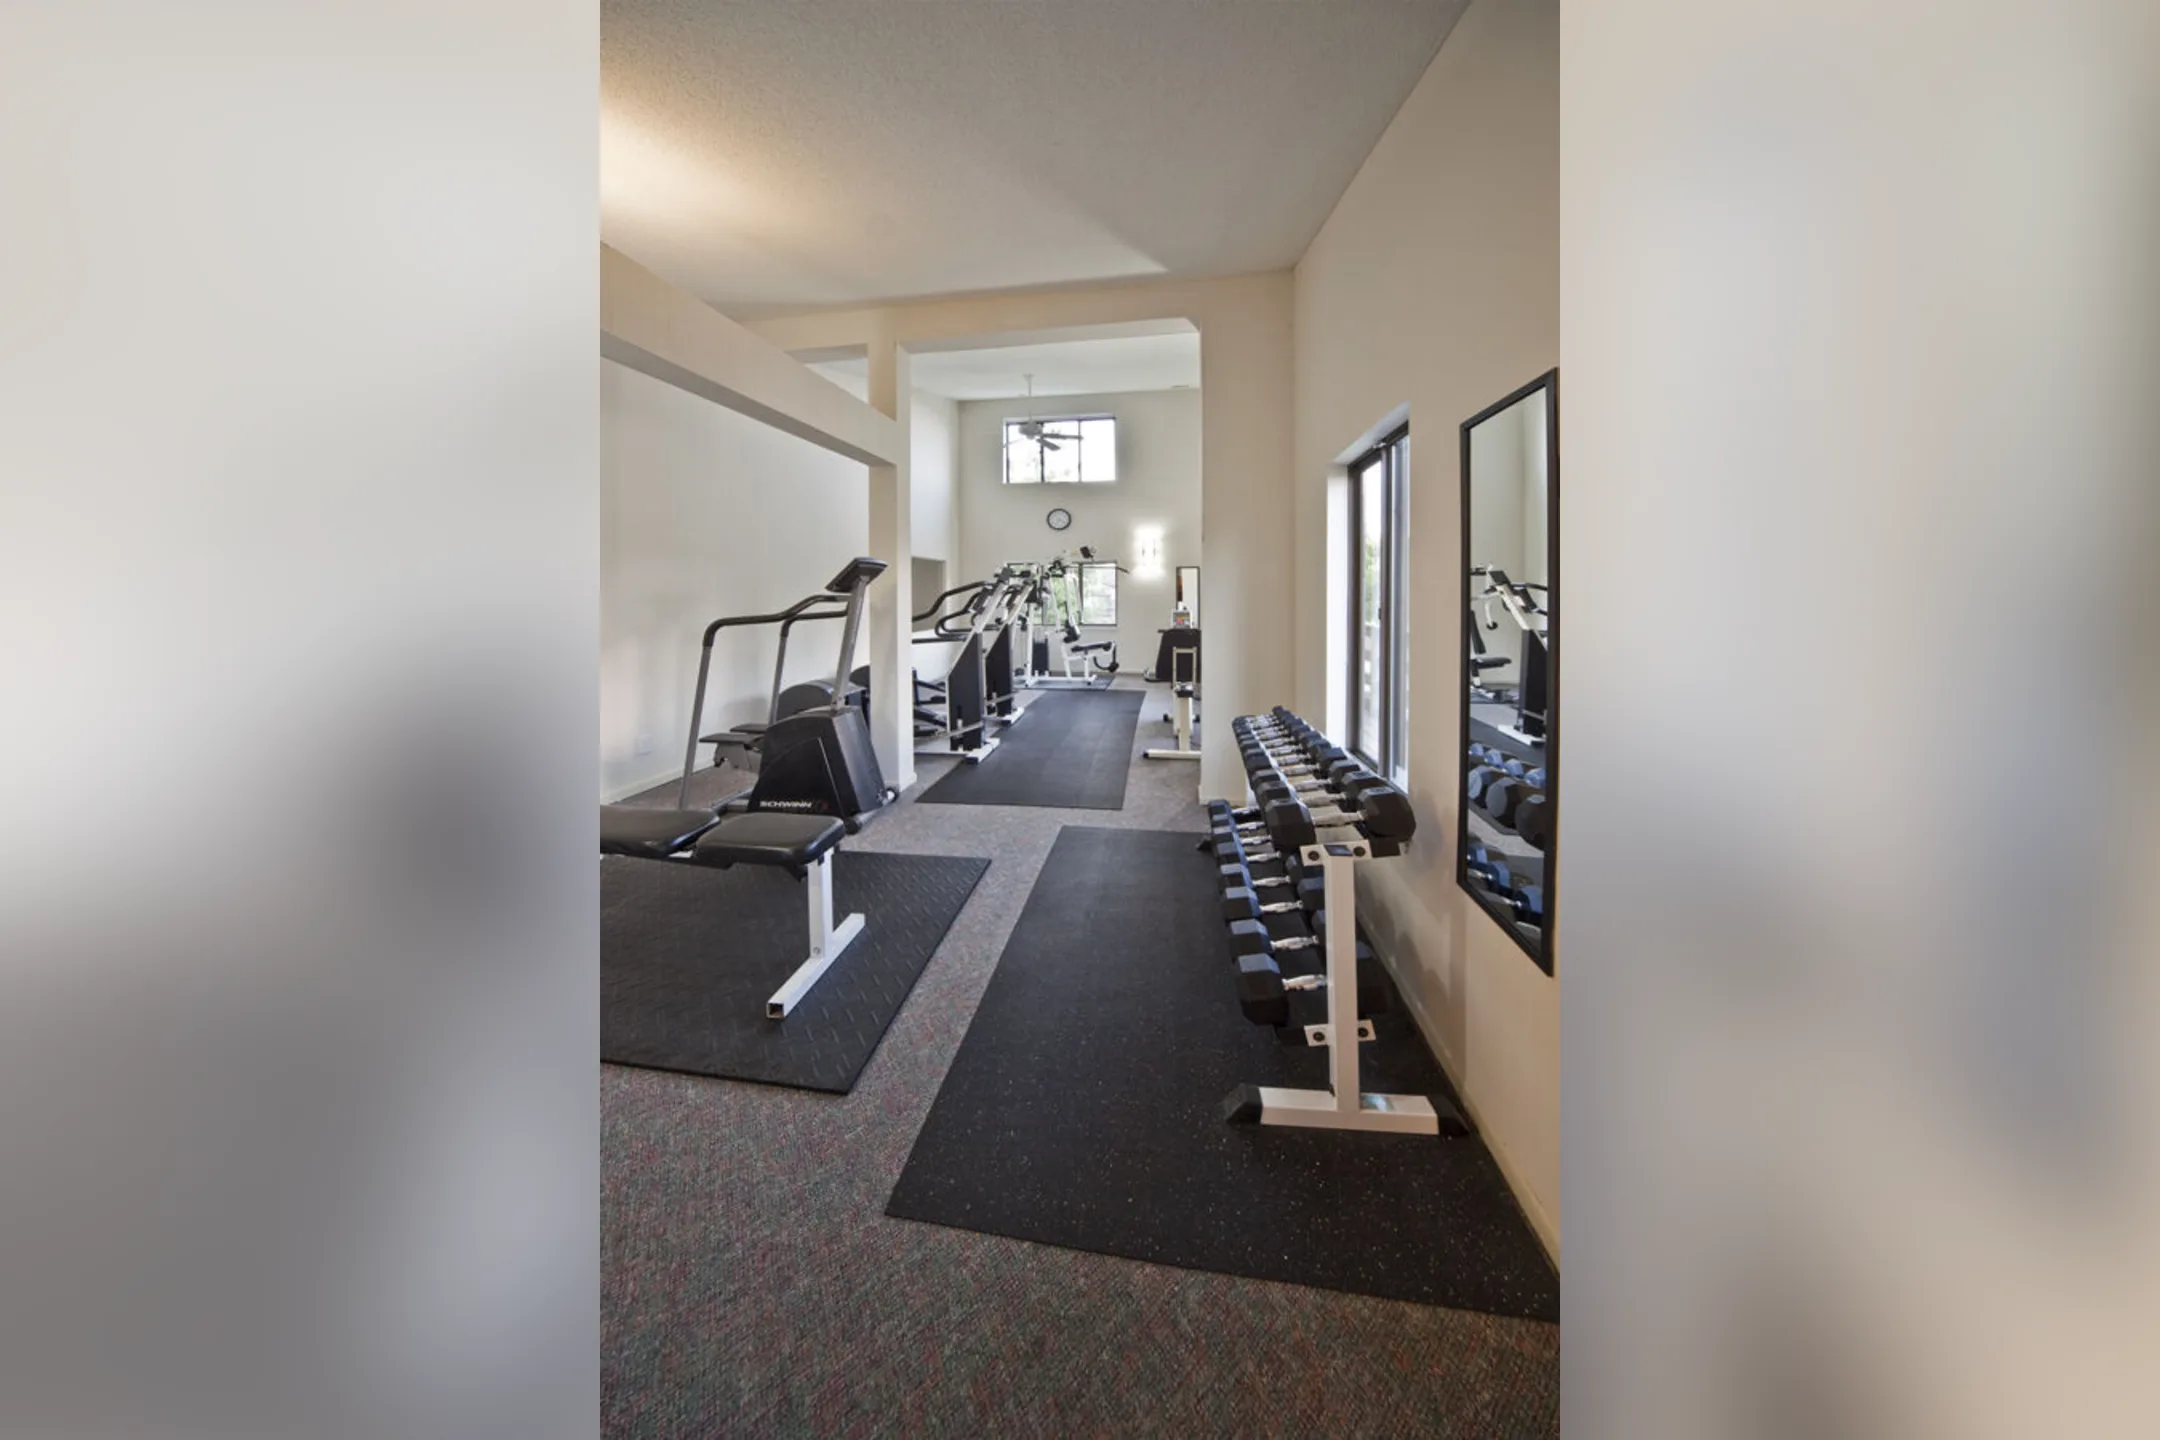 Fitness Weight Room - Landmark Apartments & Townhomes - Indianapolis, IN